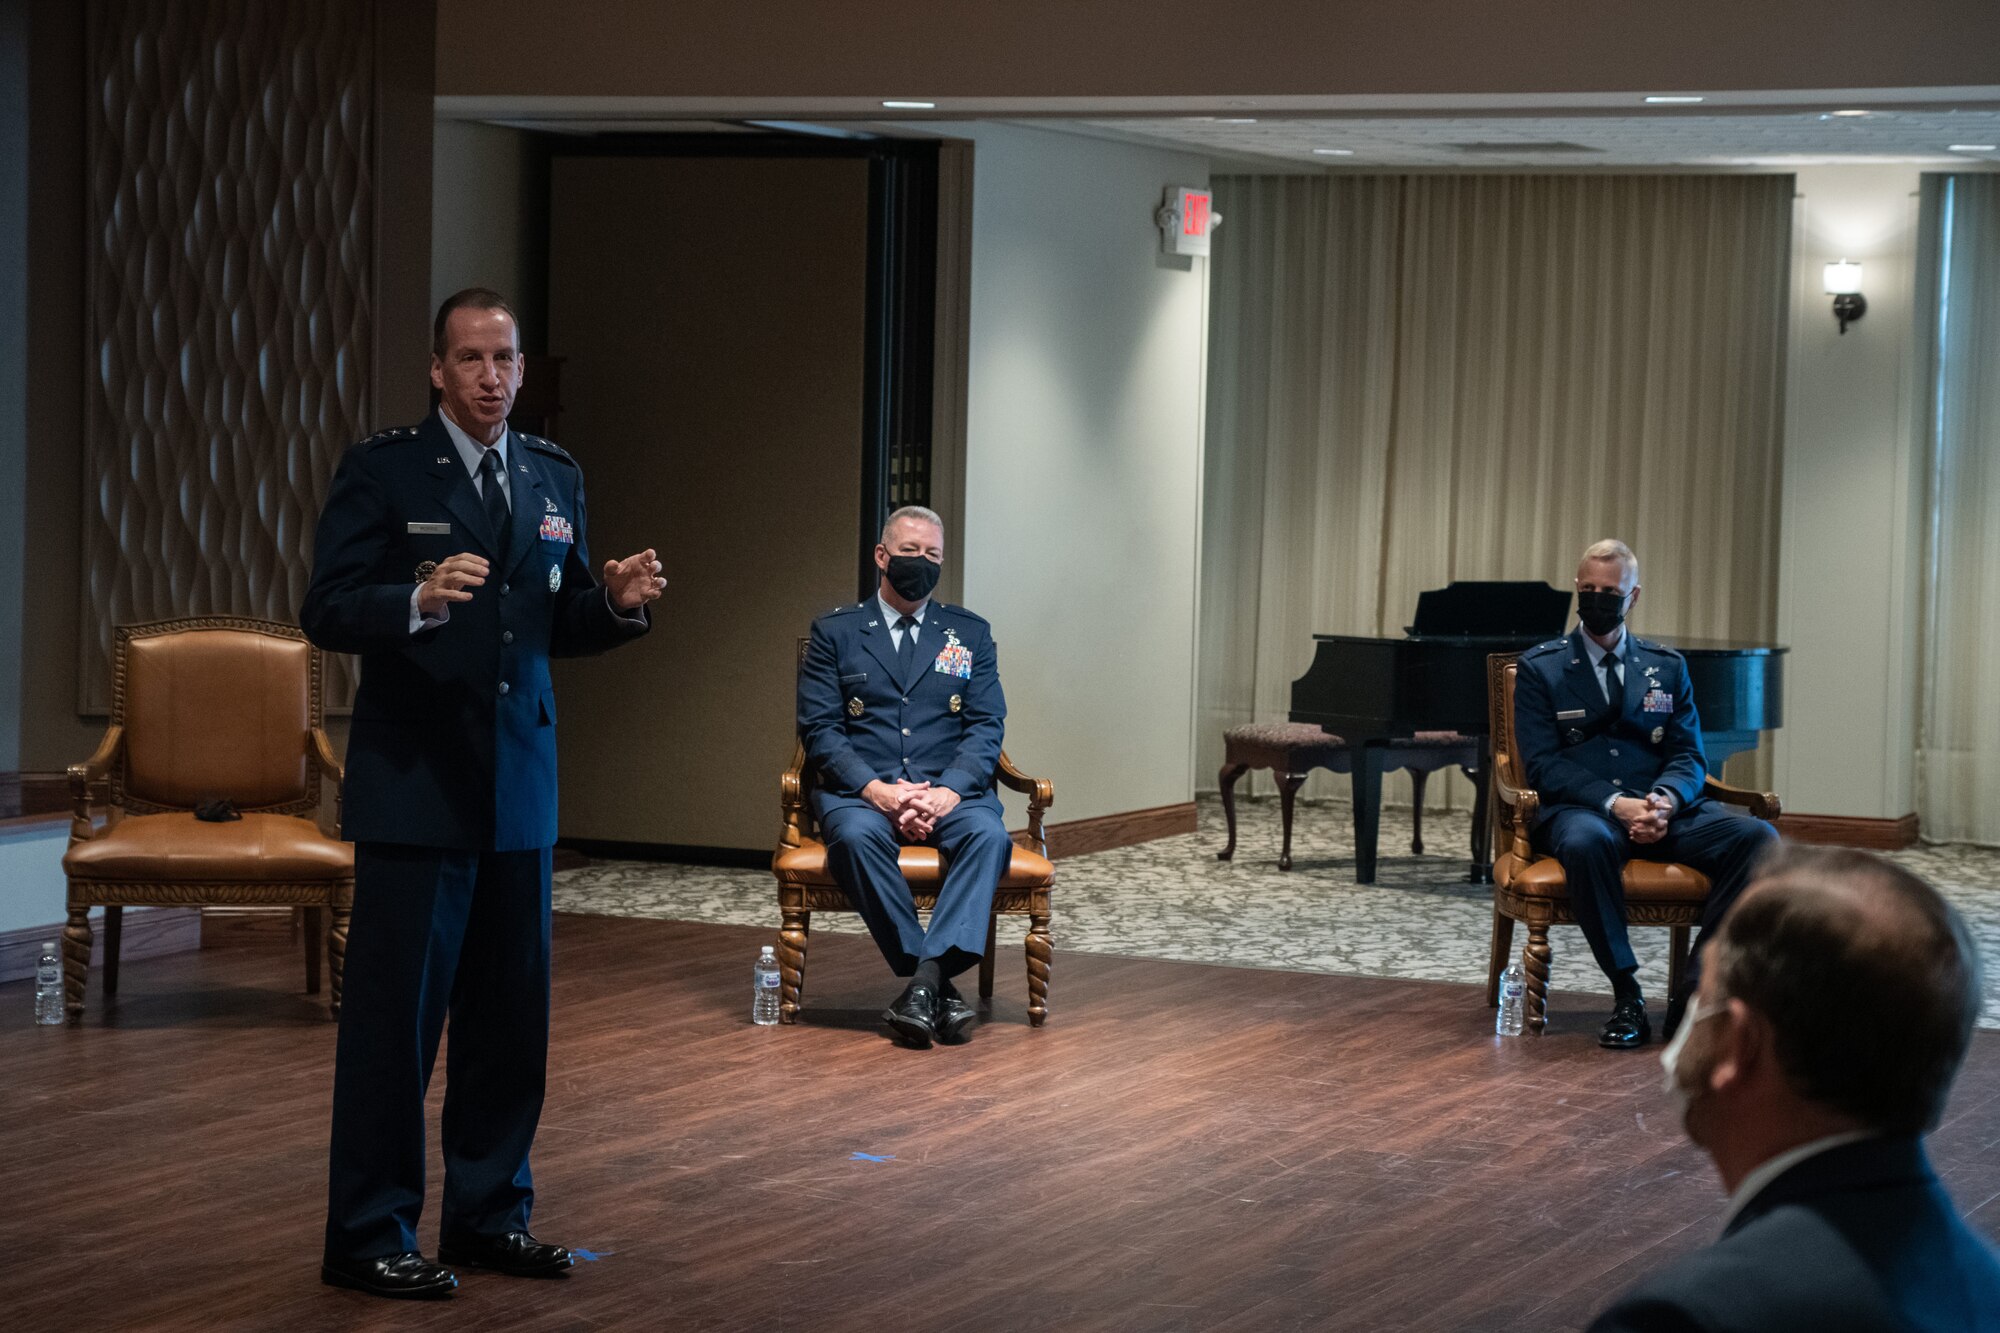 Lt. Gen. Shaun Q. Morris, Air Force Life Cycle Management Center commander, speaks during the Air Force Security Assistance and Cooperation Directorate Change of Leadership Ceremony at the Wright-Patterson Club, August 13, 2021.